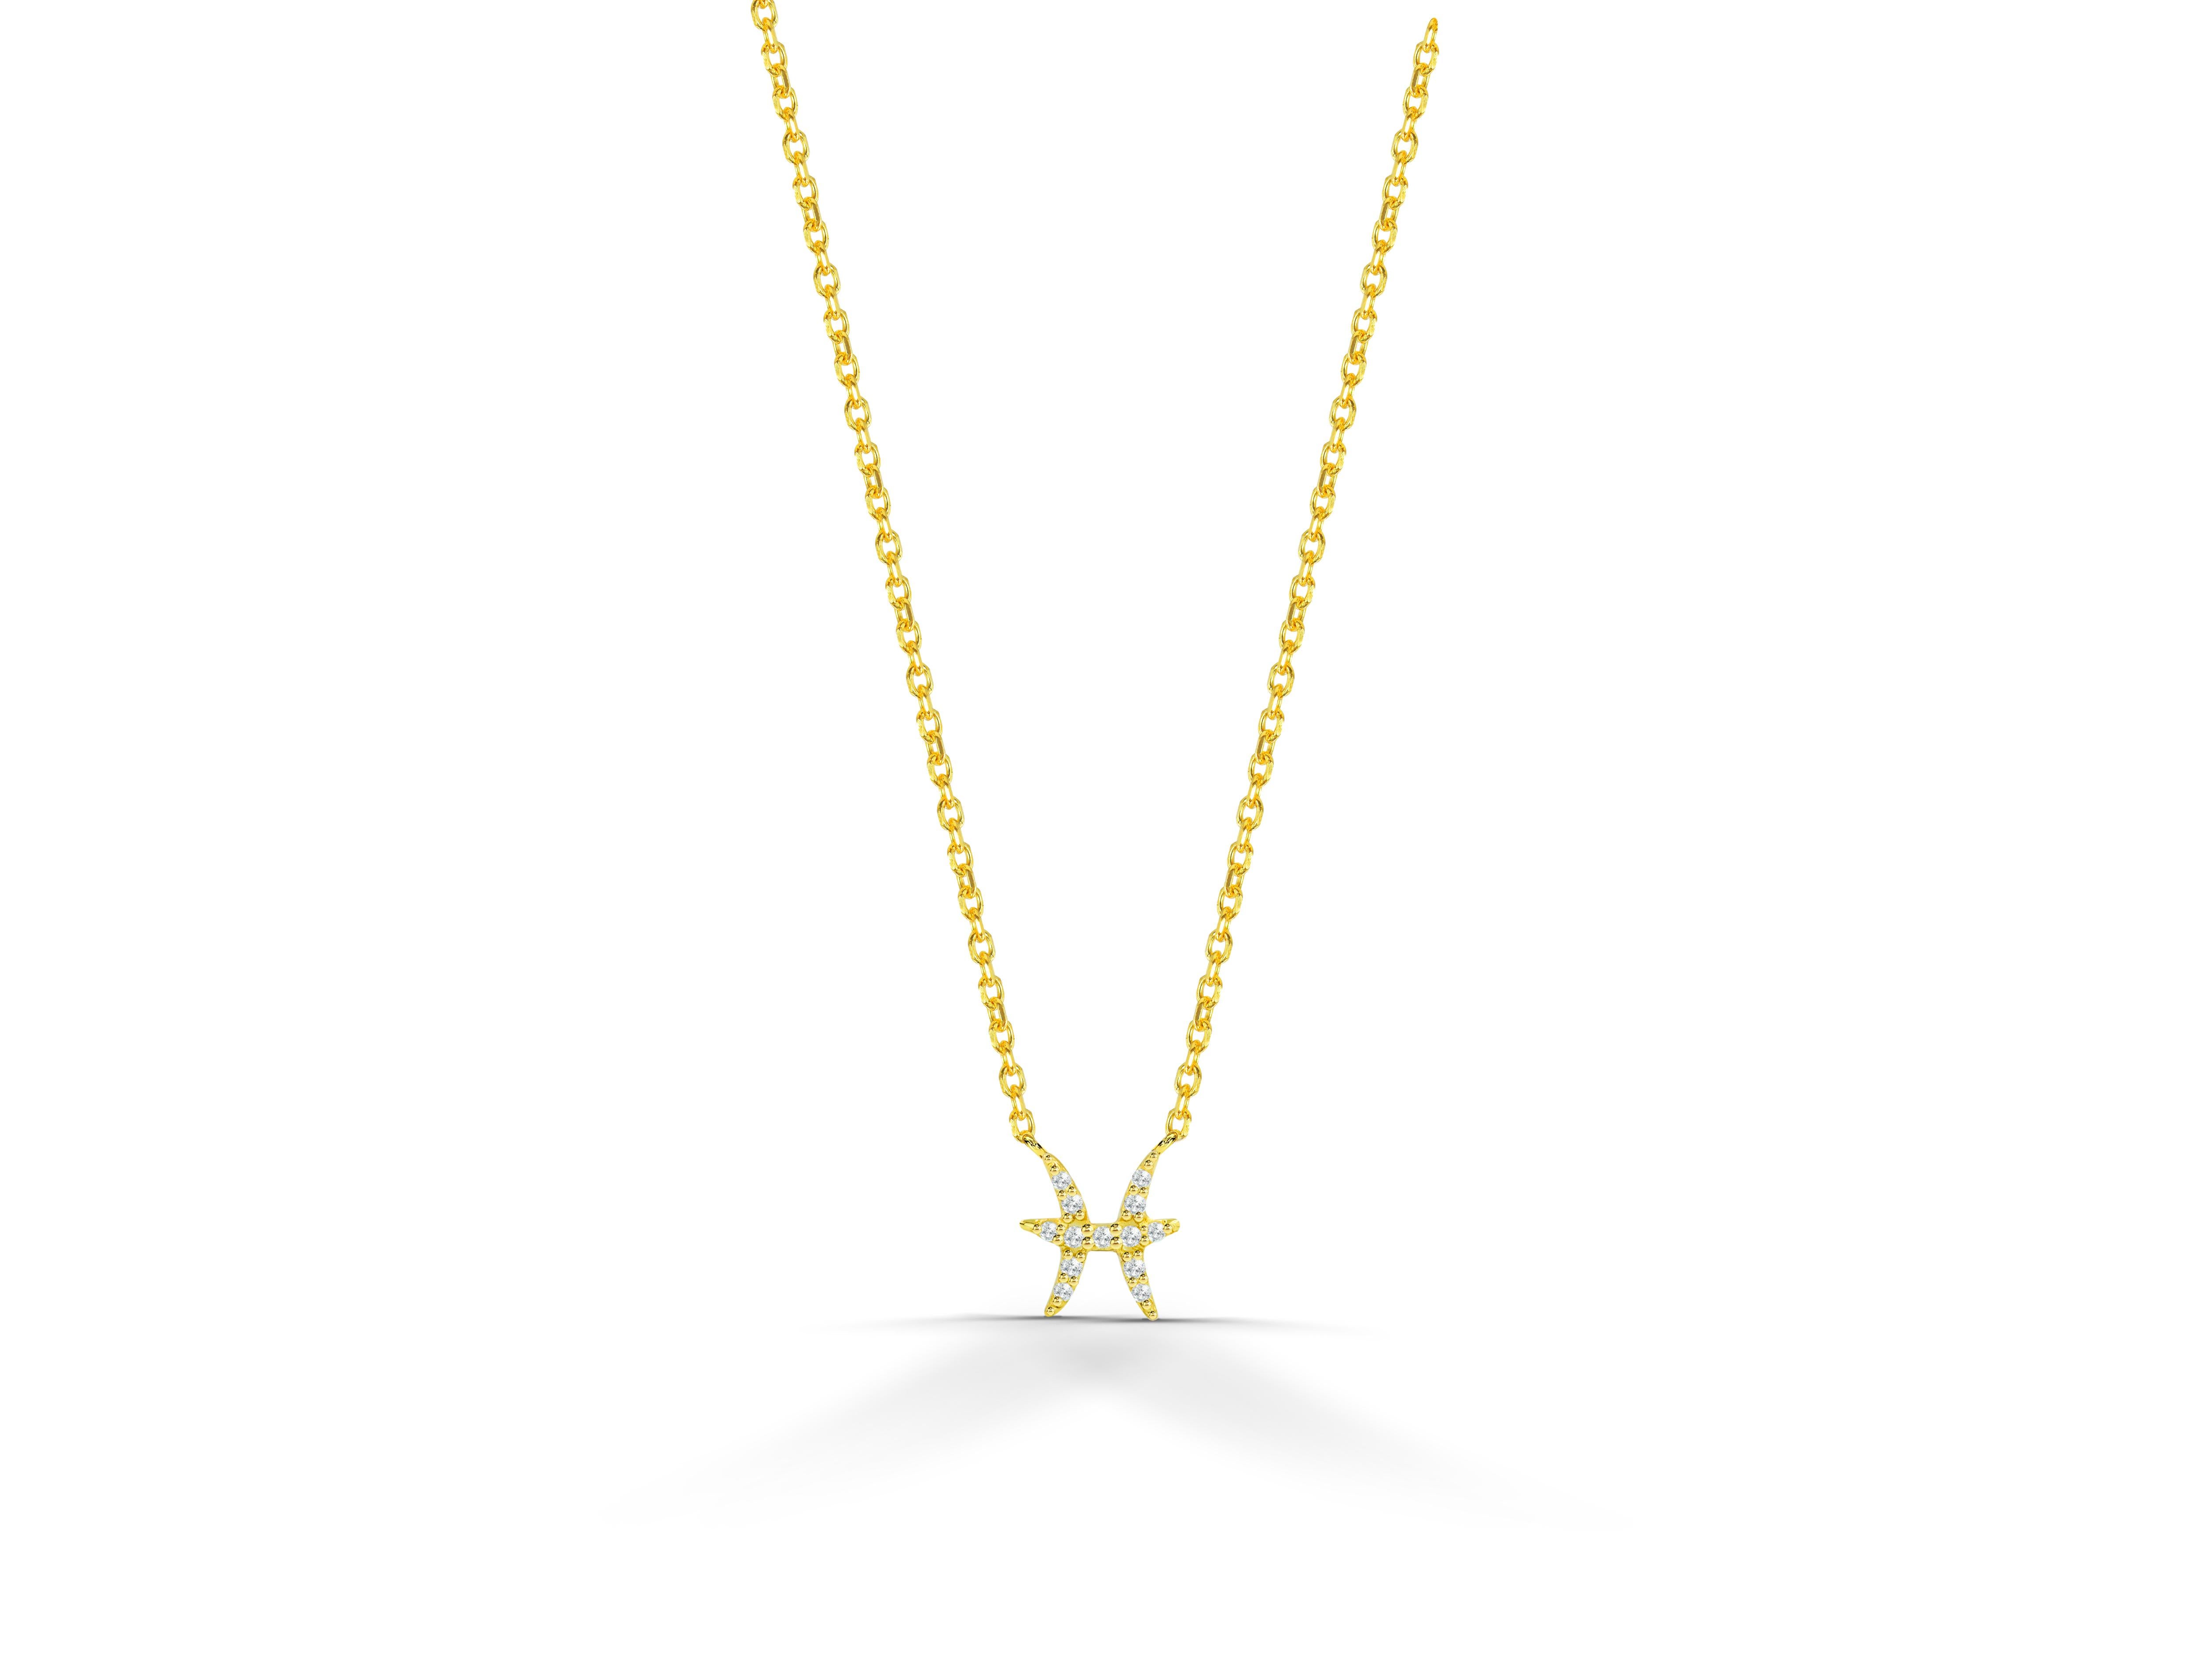 Beautiful and Sparkly Diamond Pisces Necklace made of 18k solid gold.
Available in three colors of gold: Yellow Gold / White Gold / Rose Gold.

Natural genuine round cut diamond each diamond is hand selected by me to ensure quality and set by a